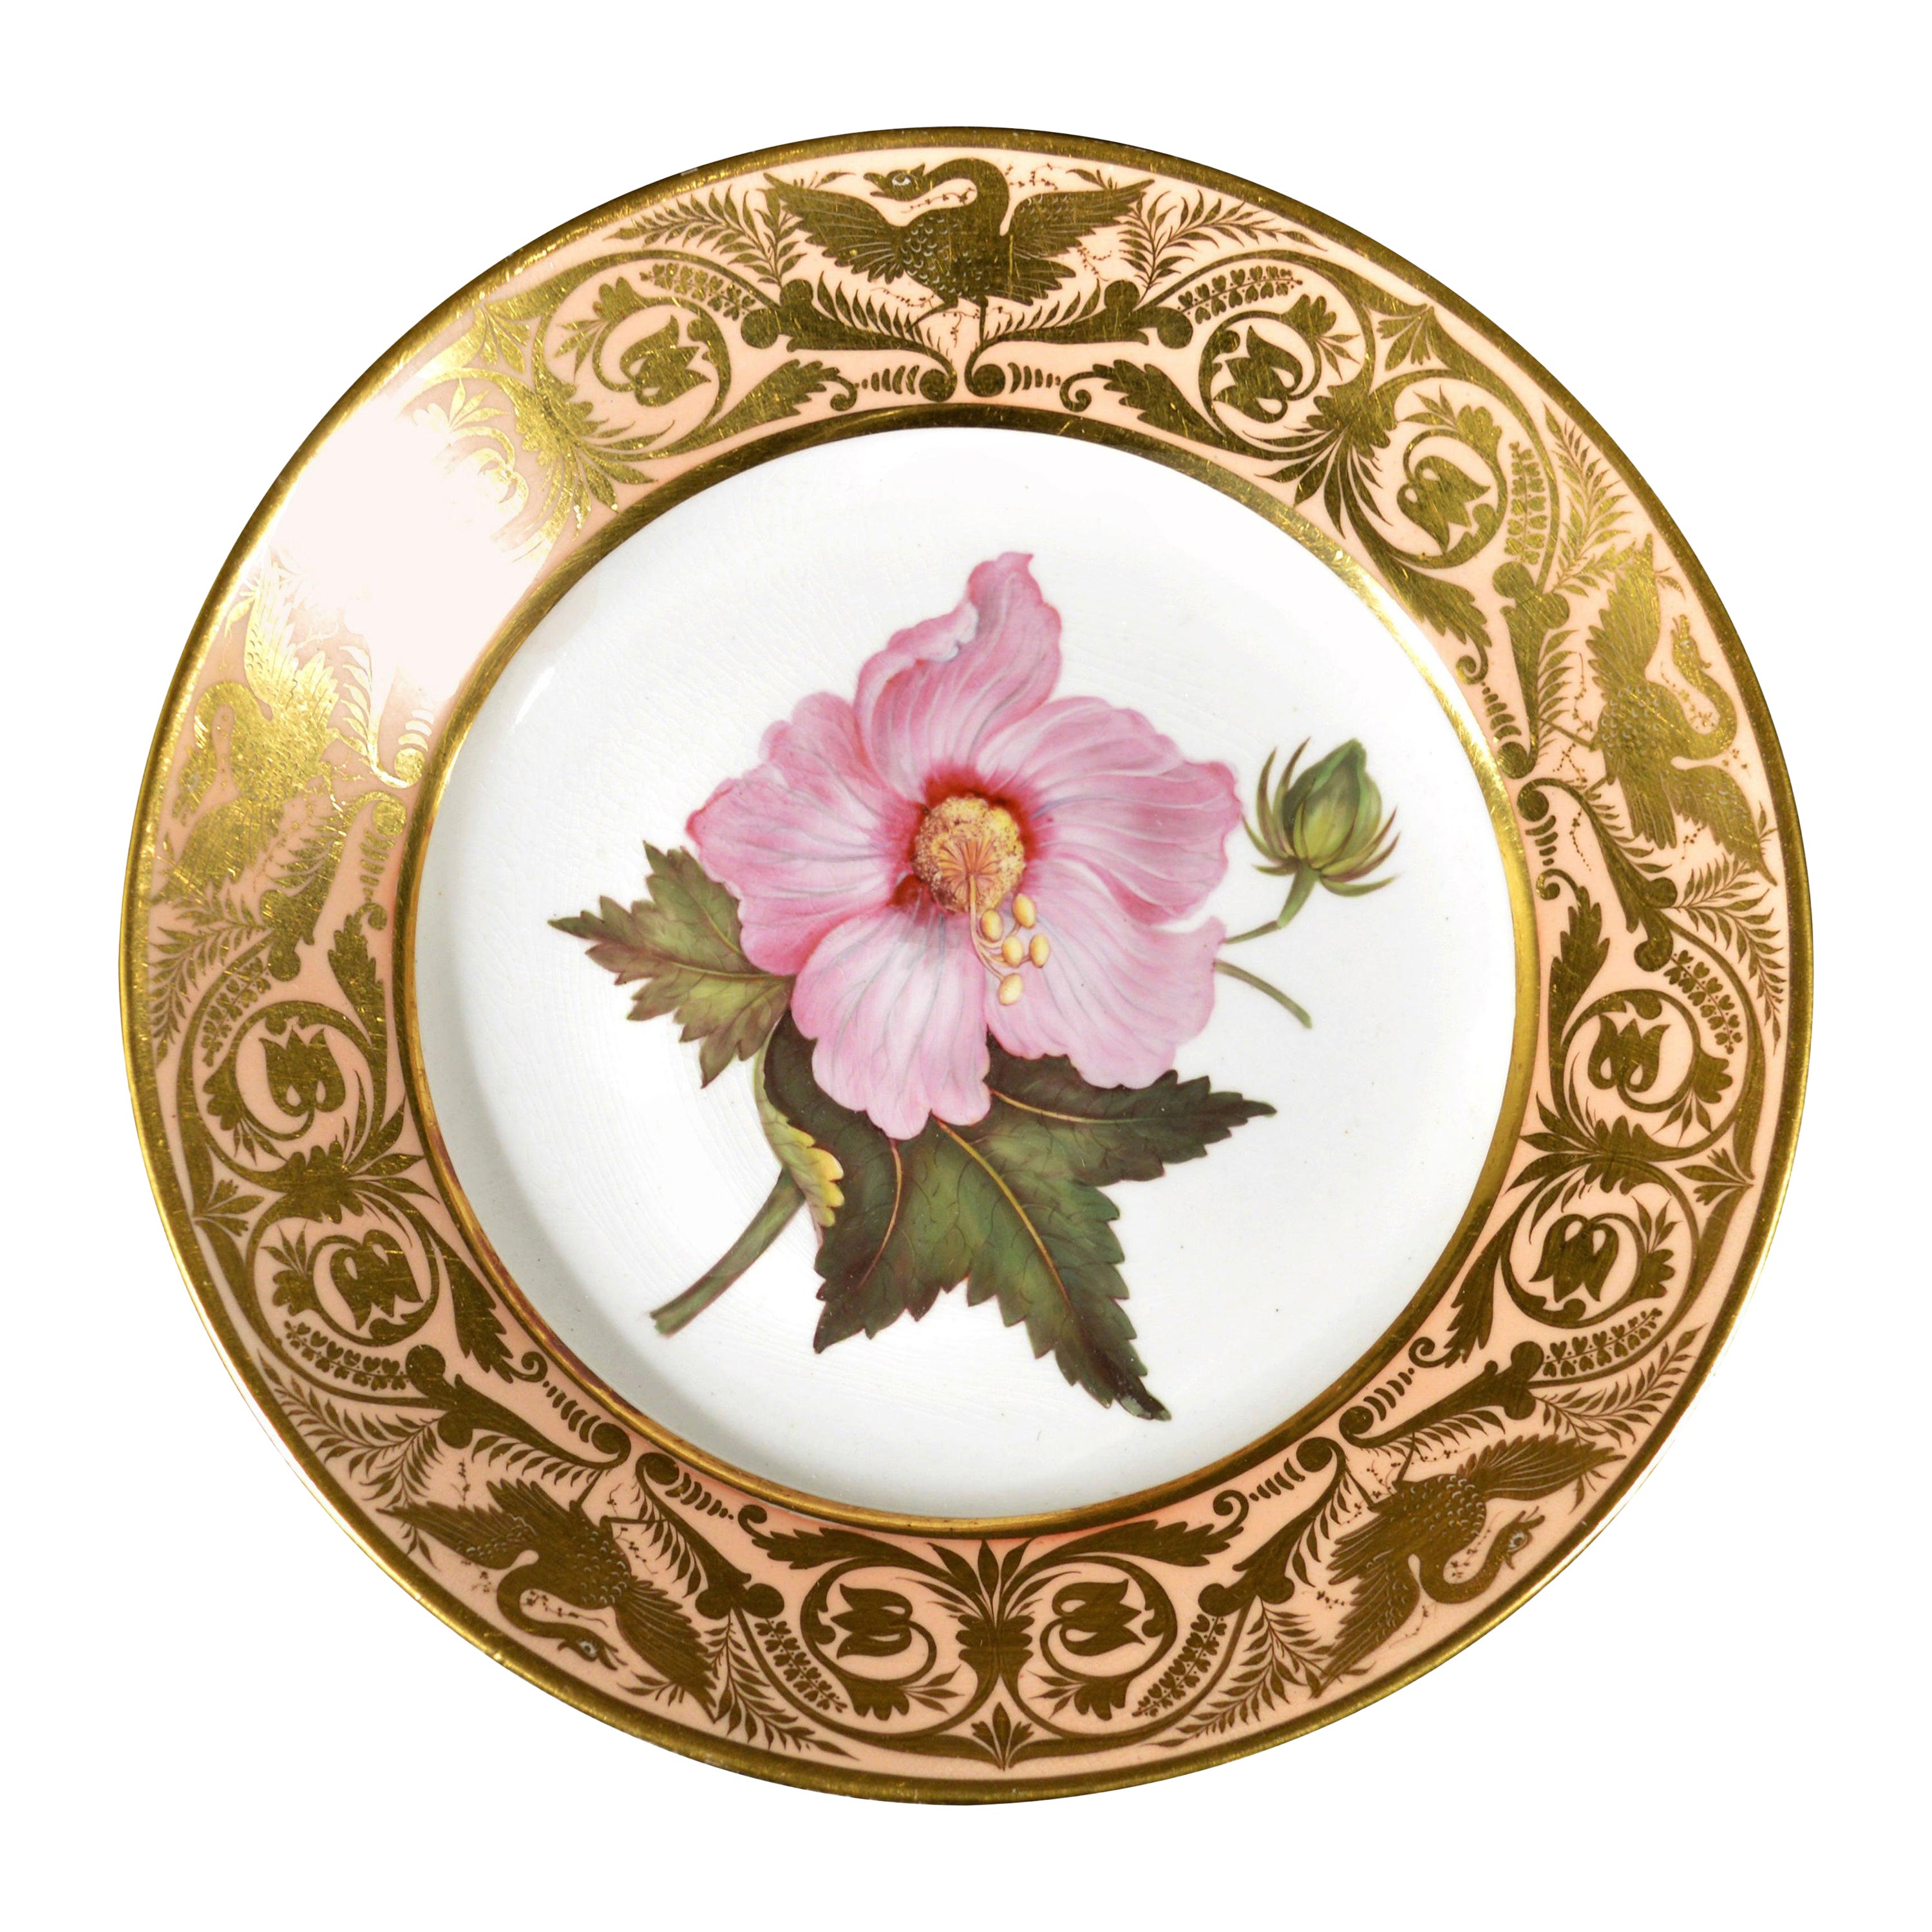 Derby Porcelain Salmon Ground Plate, Marsh Hibiscus, after William Curtis